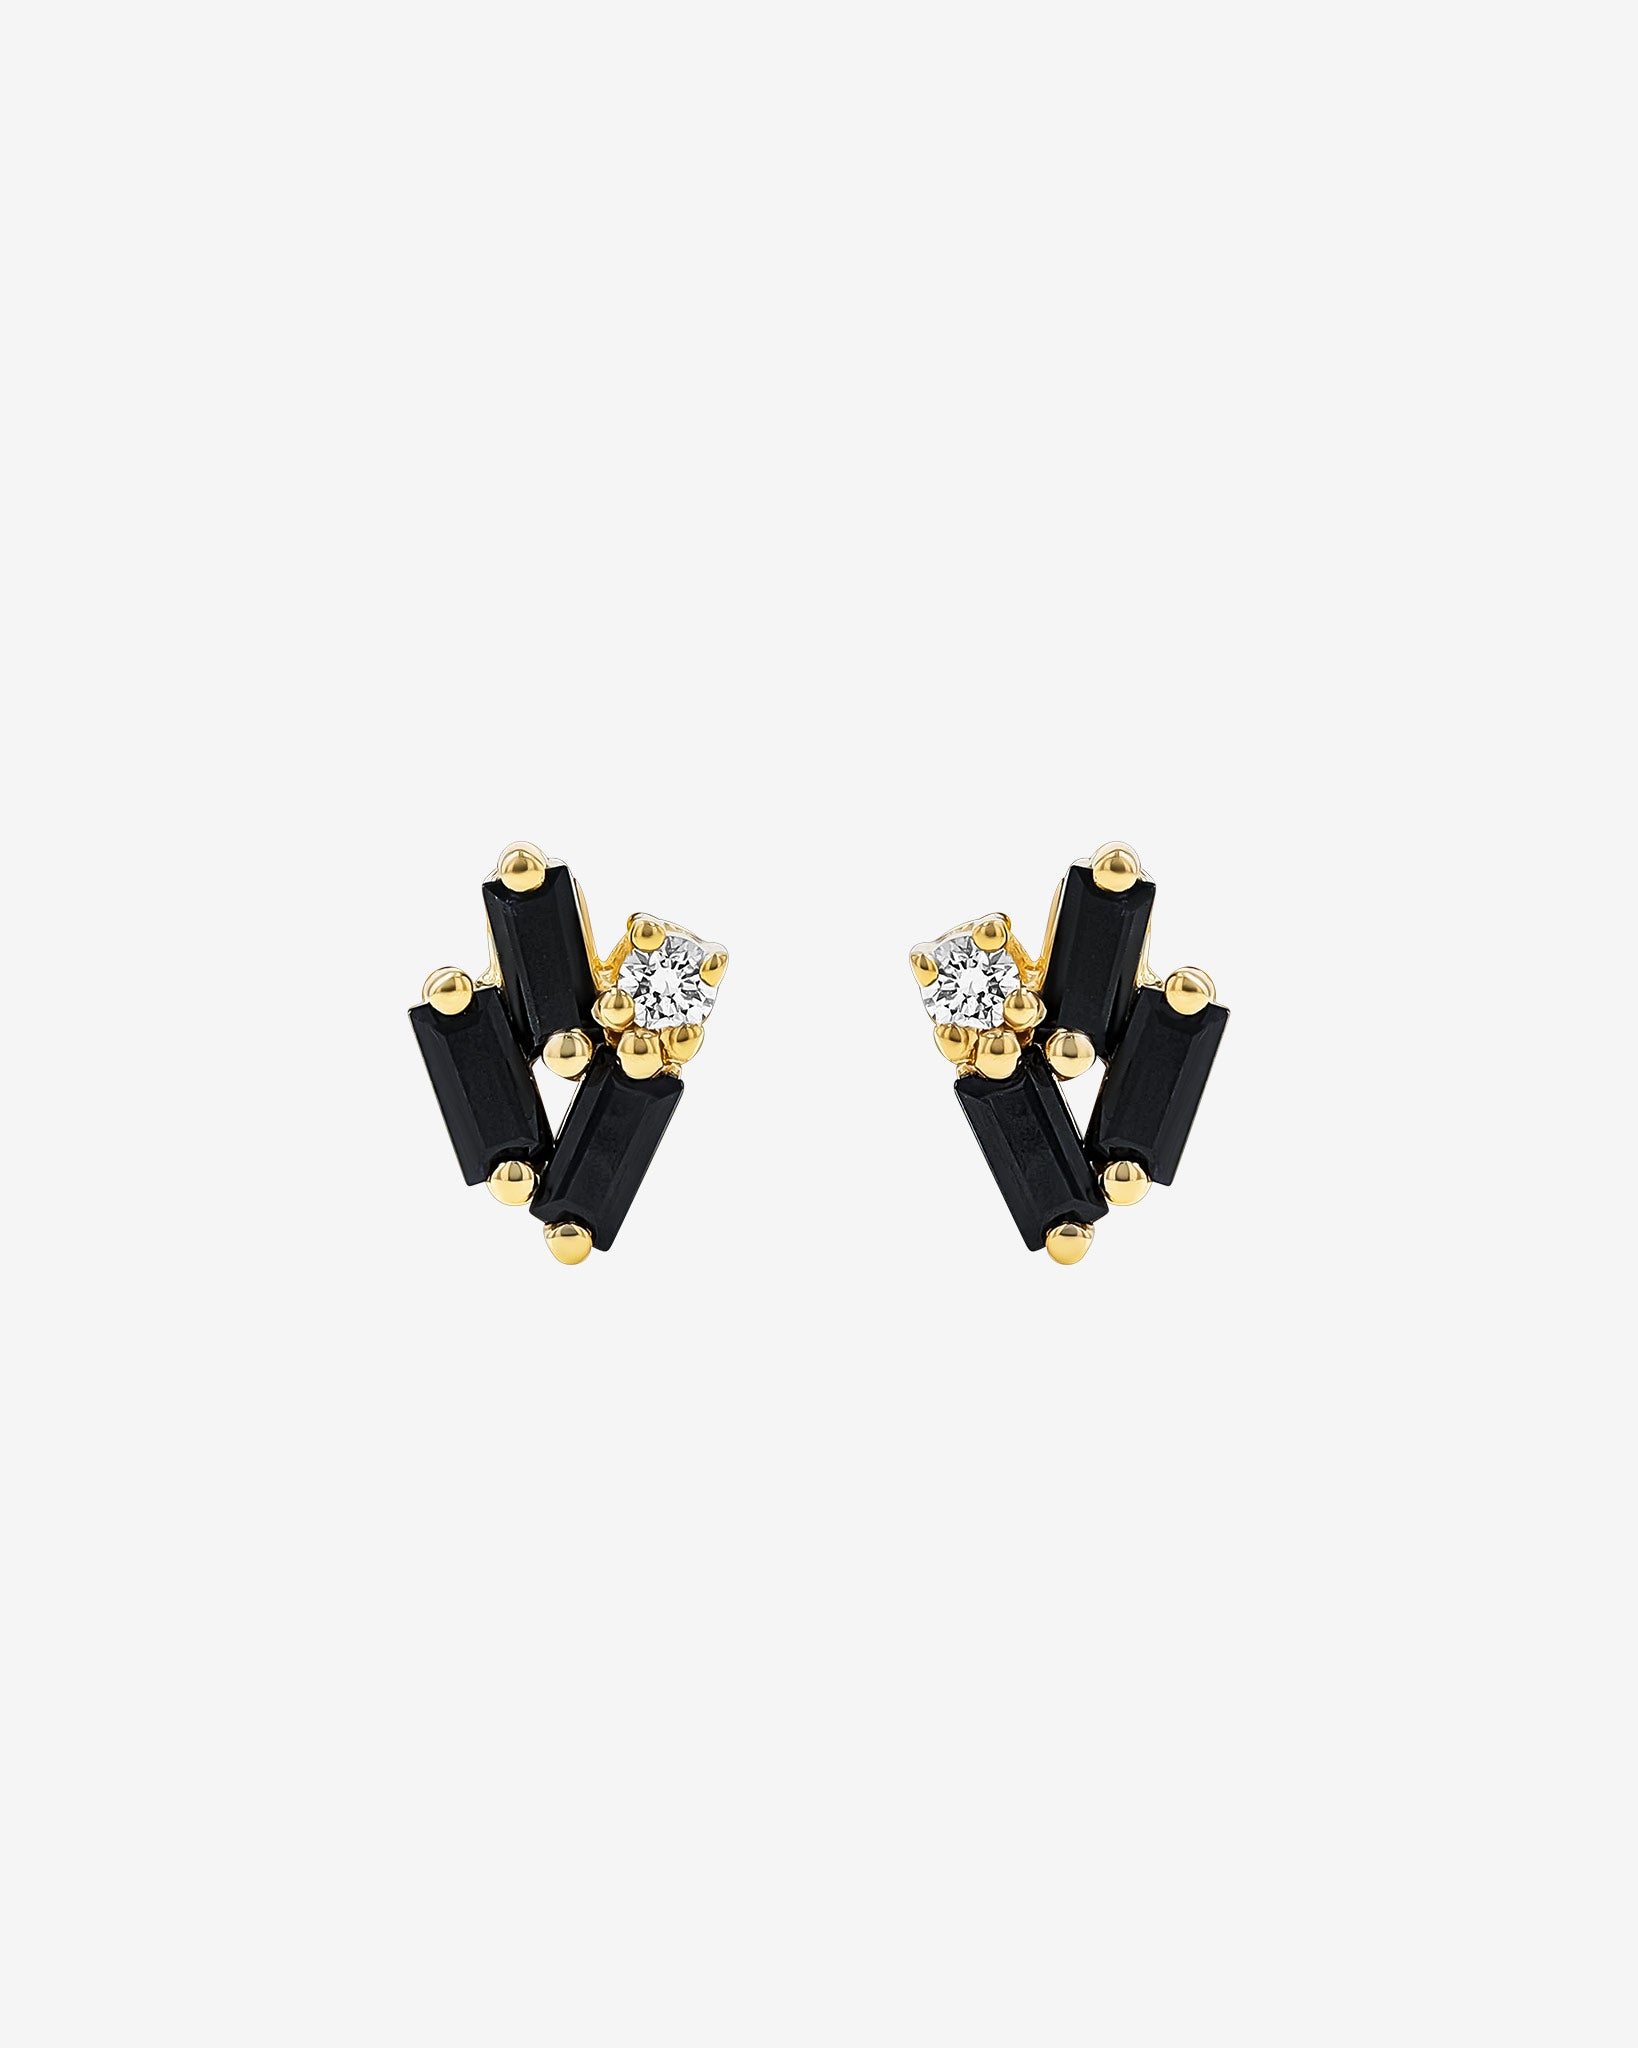 Suzanne Kalan Bold Cluster Black Sapphire Studs in 18k yellow gold